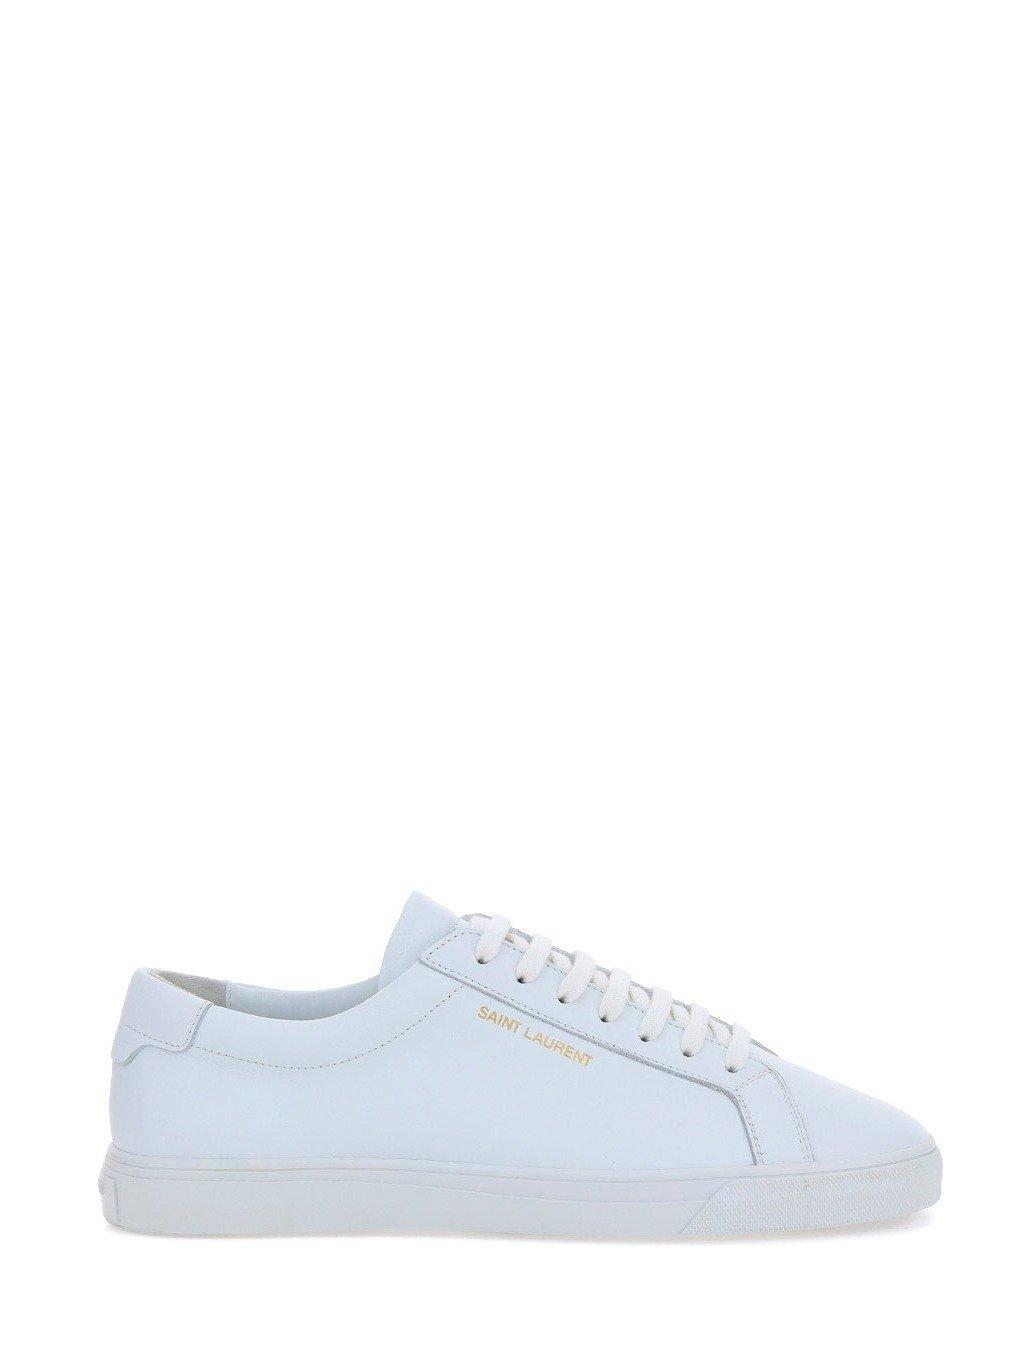 Saint Laurent Leather Andy Logo Low Top Sneakers in White - Lyst